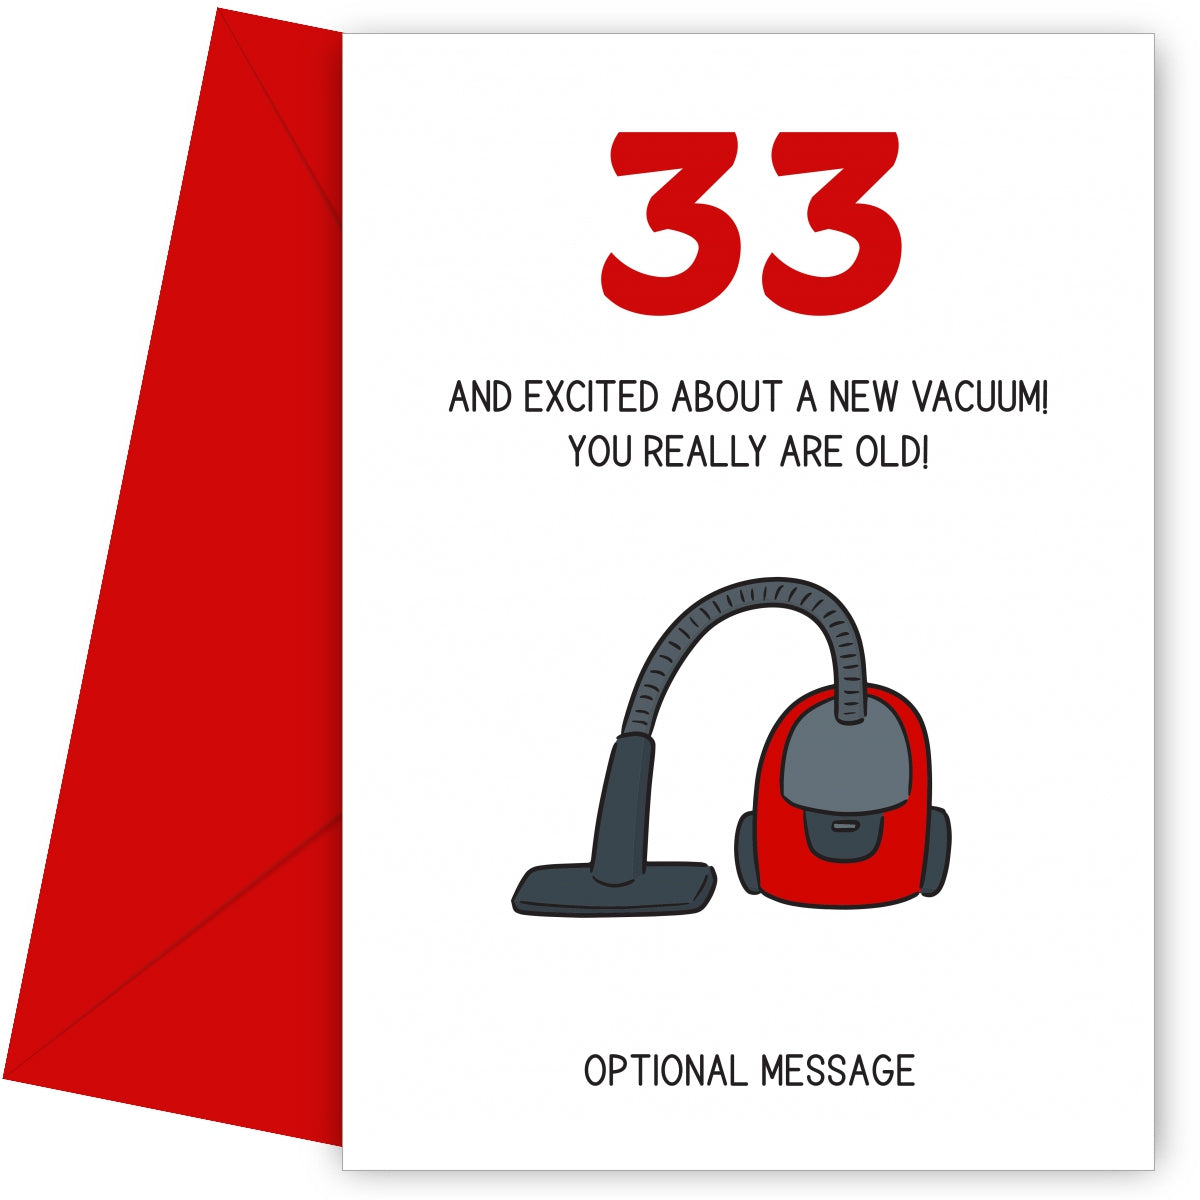 Happy 33rd Birthday Card - Excited About a New Vacuum!